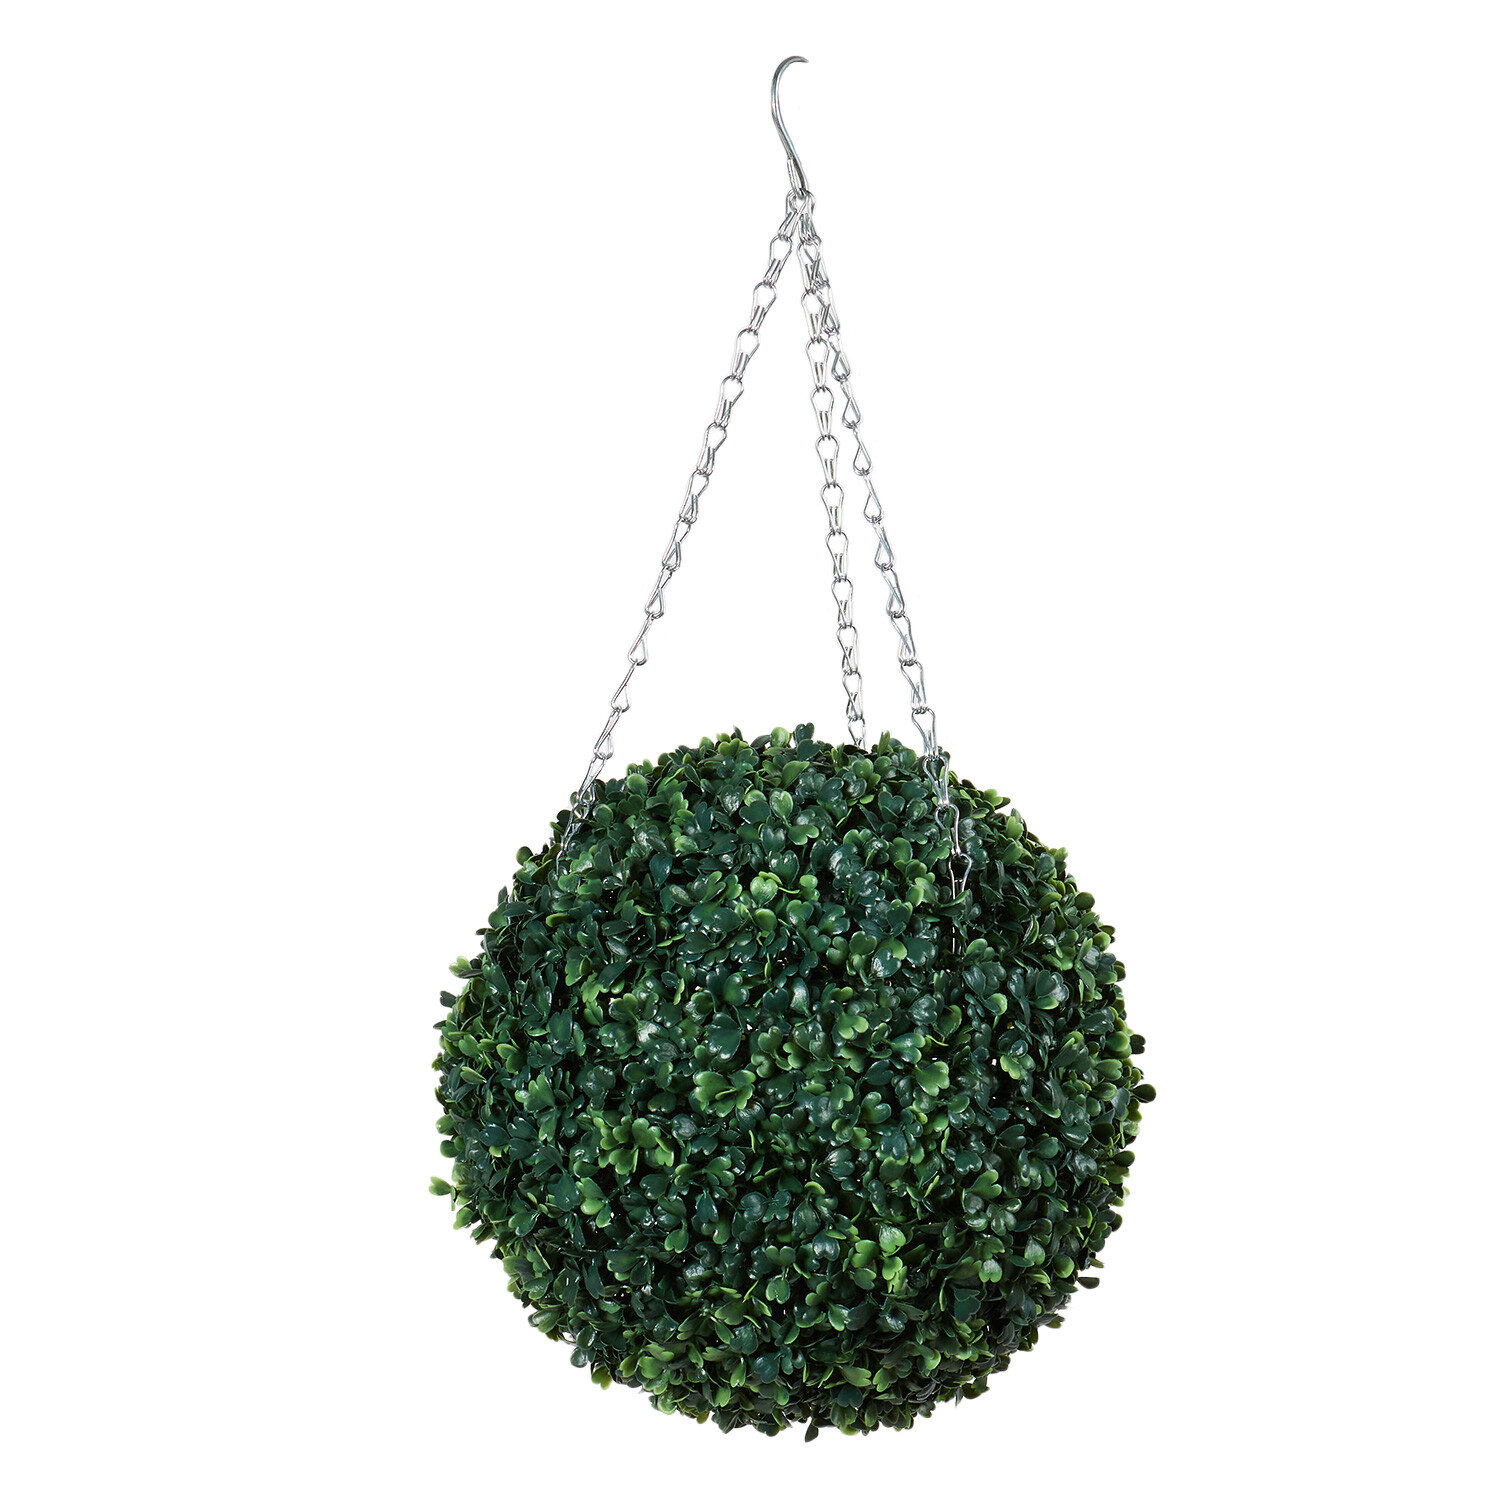 Boxwood Ball with Chain 25cm - Green Image 1